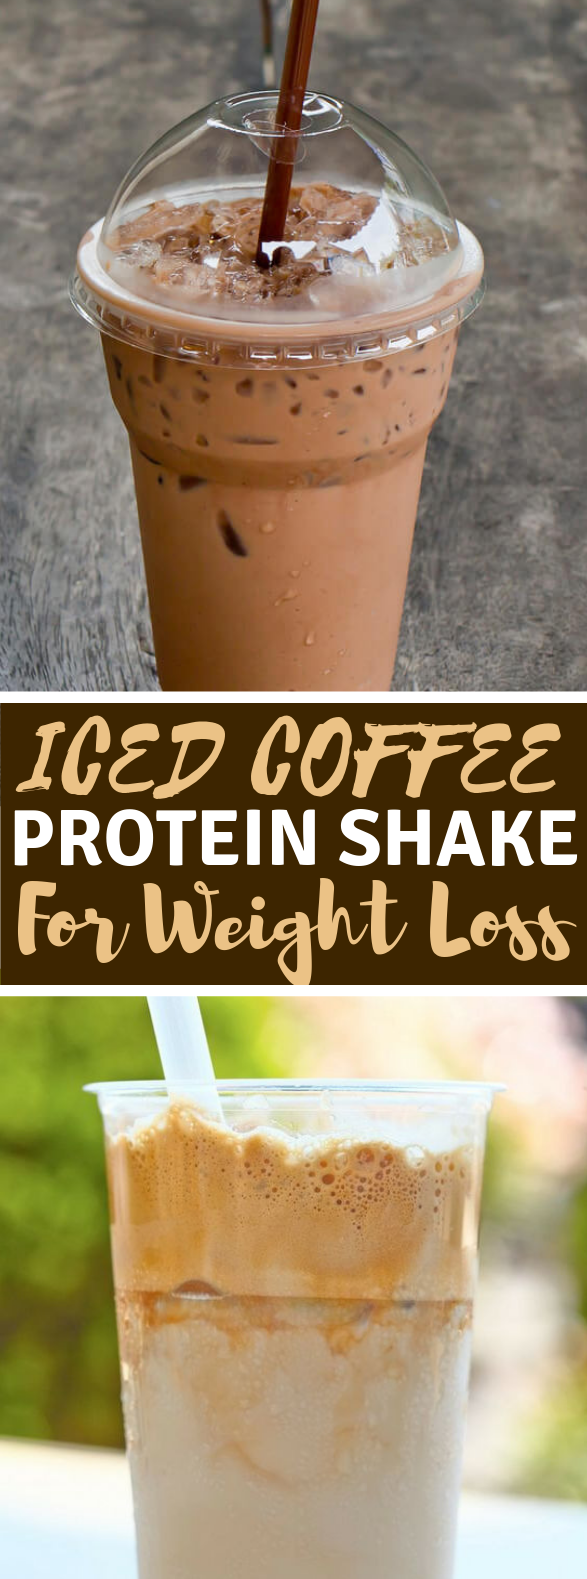 Healthy Iced Coffee Protein Shake Recipe for Weight Loss #drinks #lowcarb